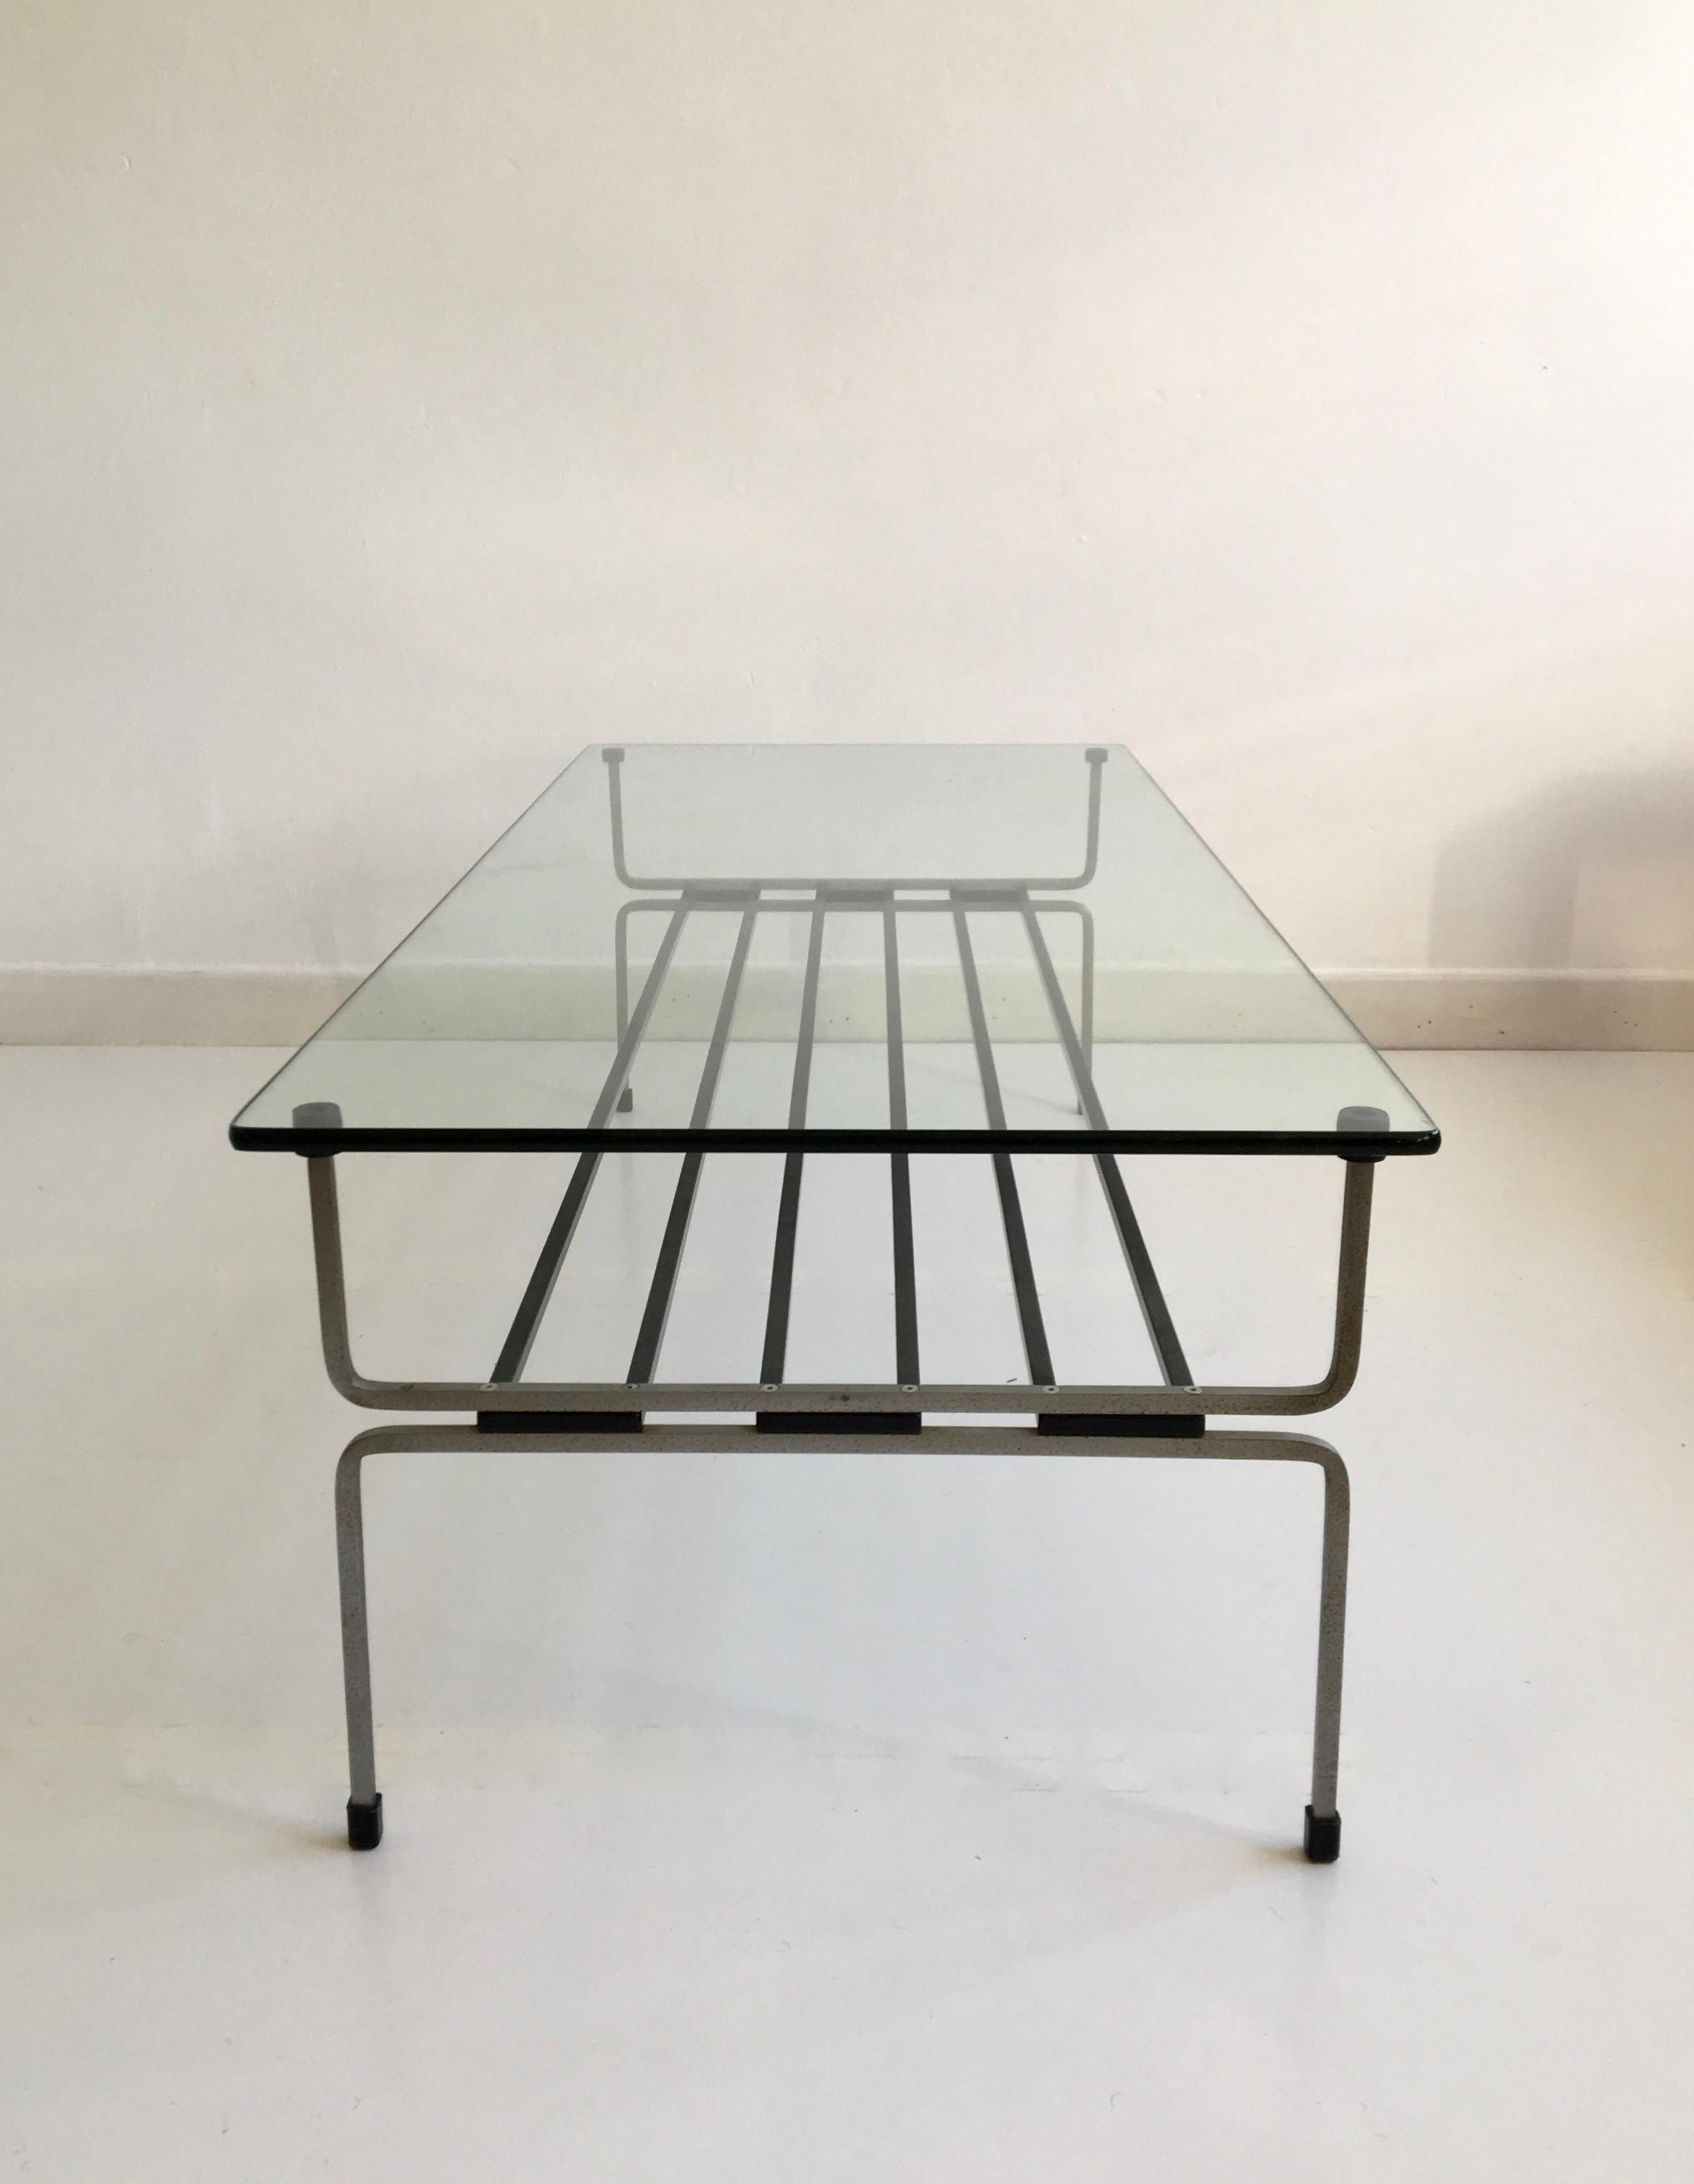 British Midcentury Glass and Steel Coffee Table by William Plunkett, England, circa 1960